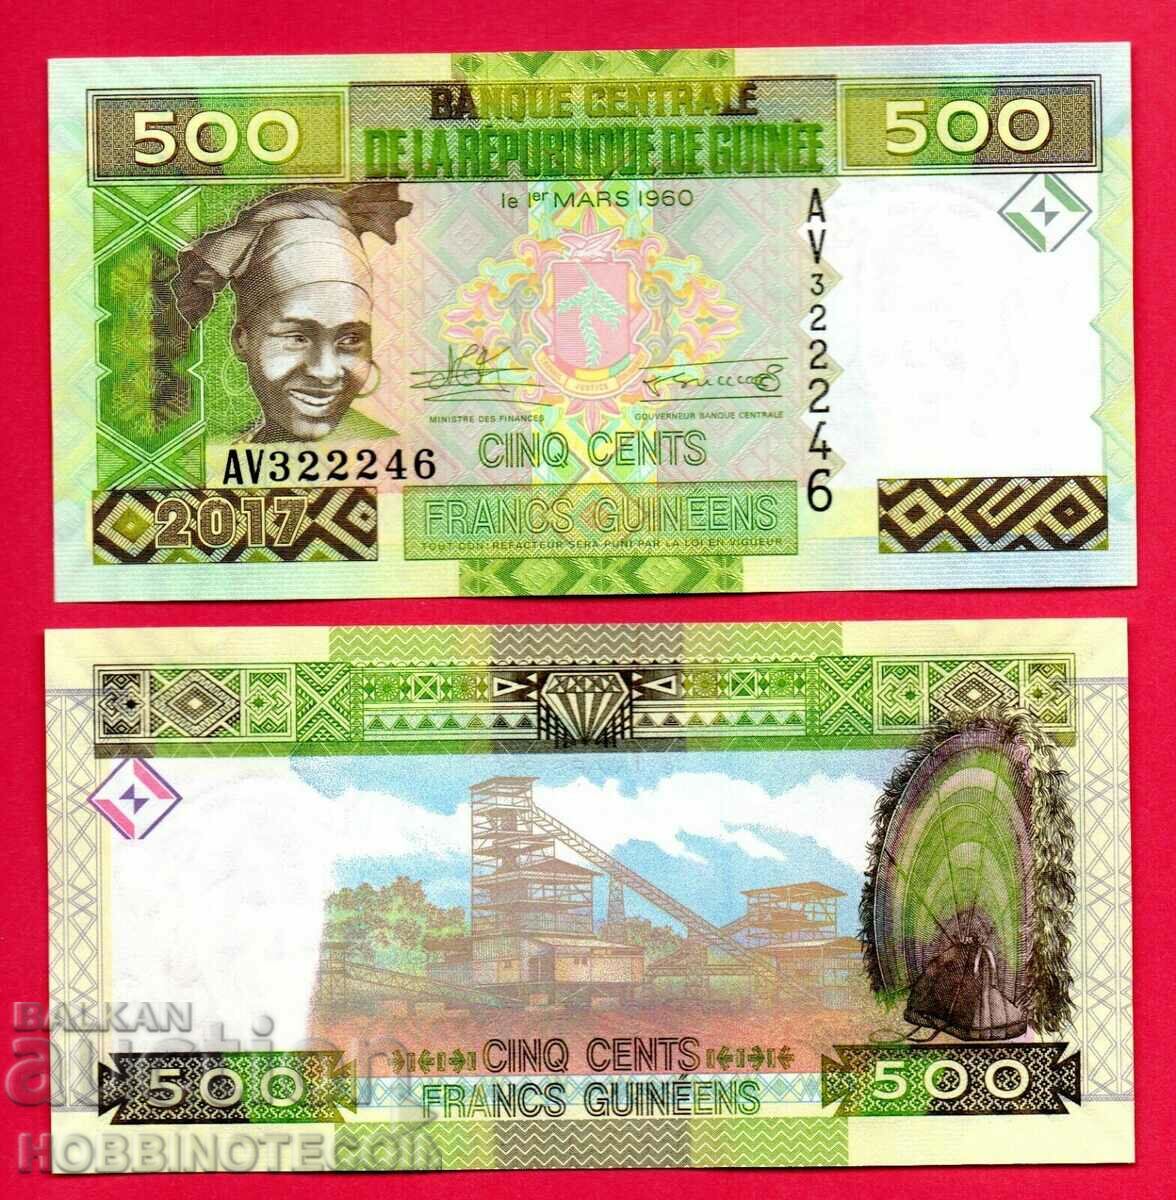 GUINEA GUINEA 500 Franc issue issue 2017 NEW UNC